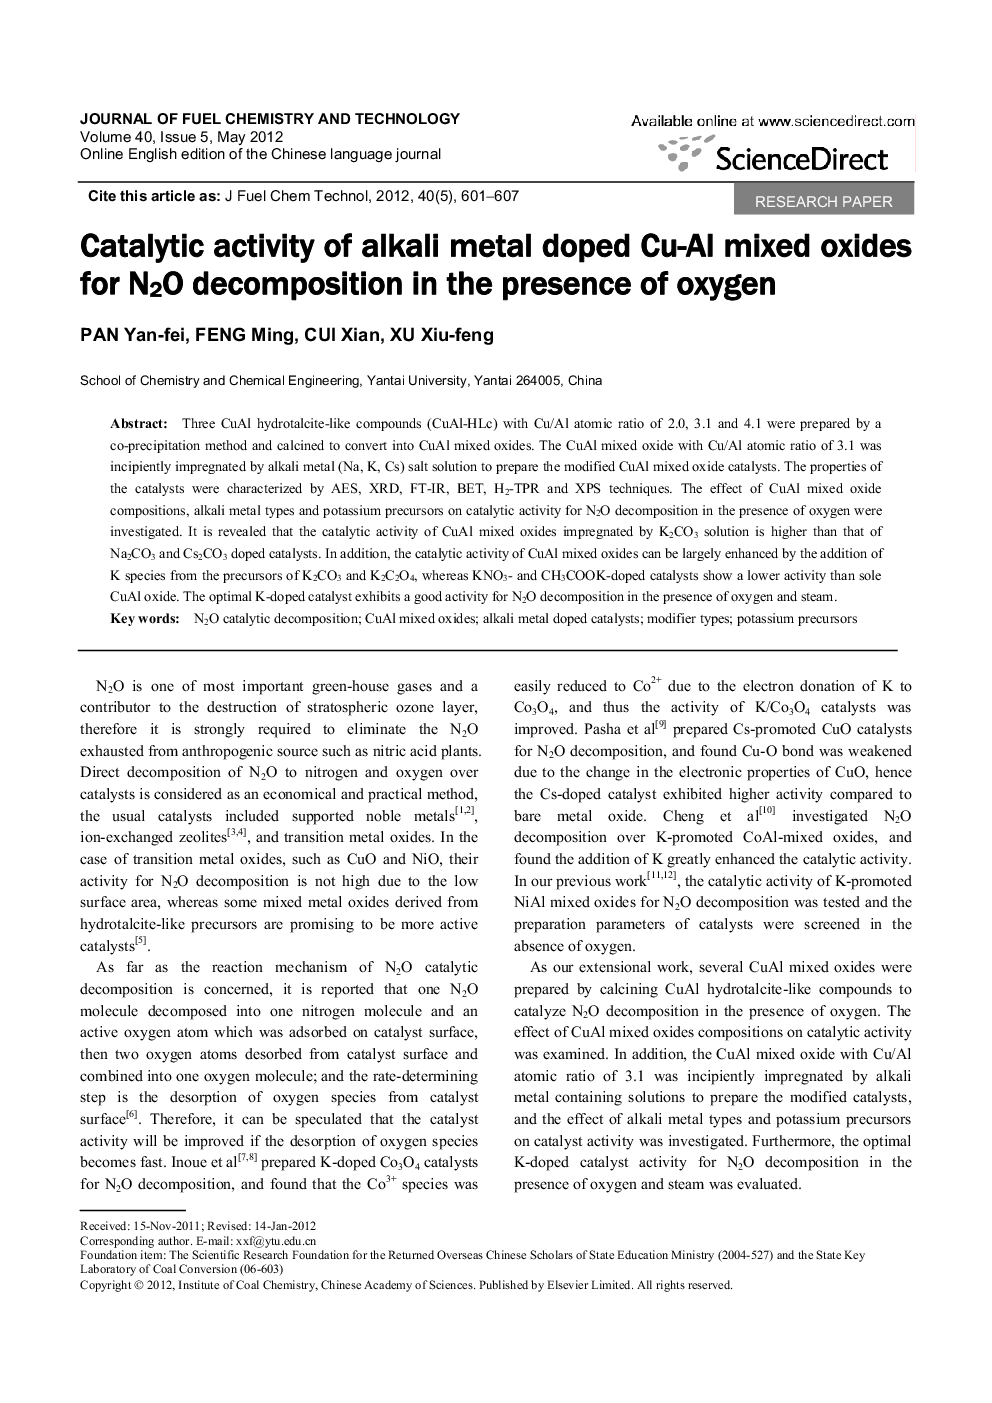 Catalytic activity of alkali metal doped Cu-Al mixed oxides for N2O decomposition in the presence of oxygen 